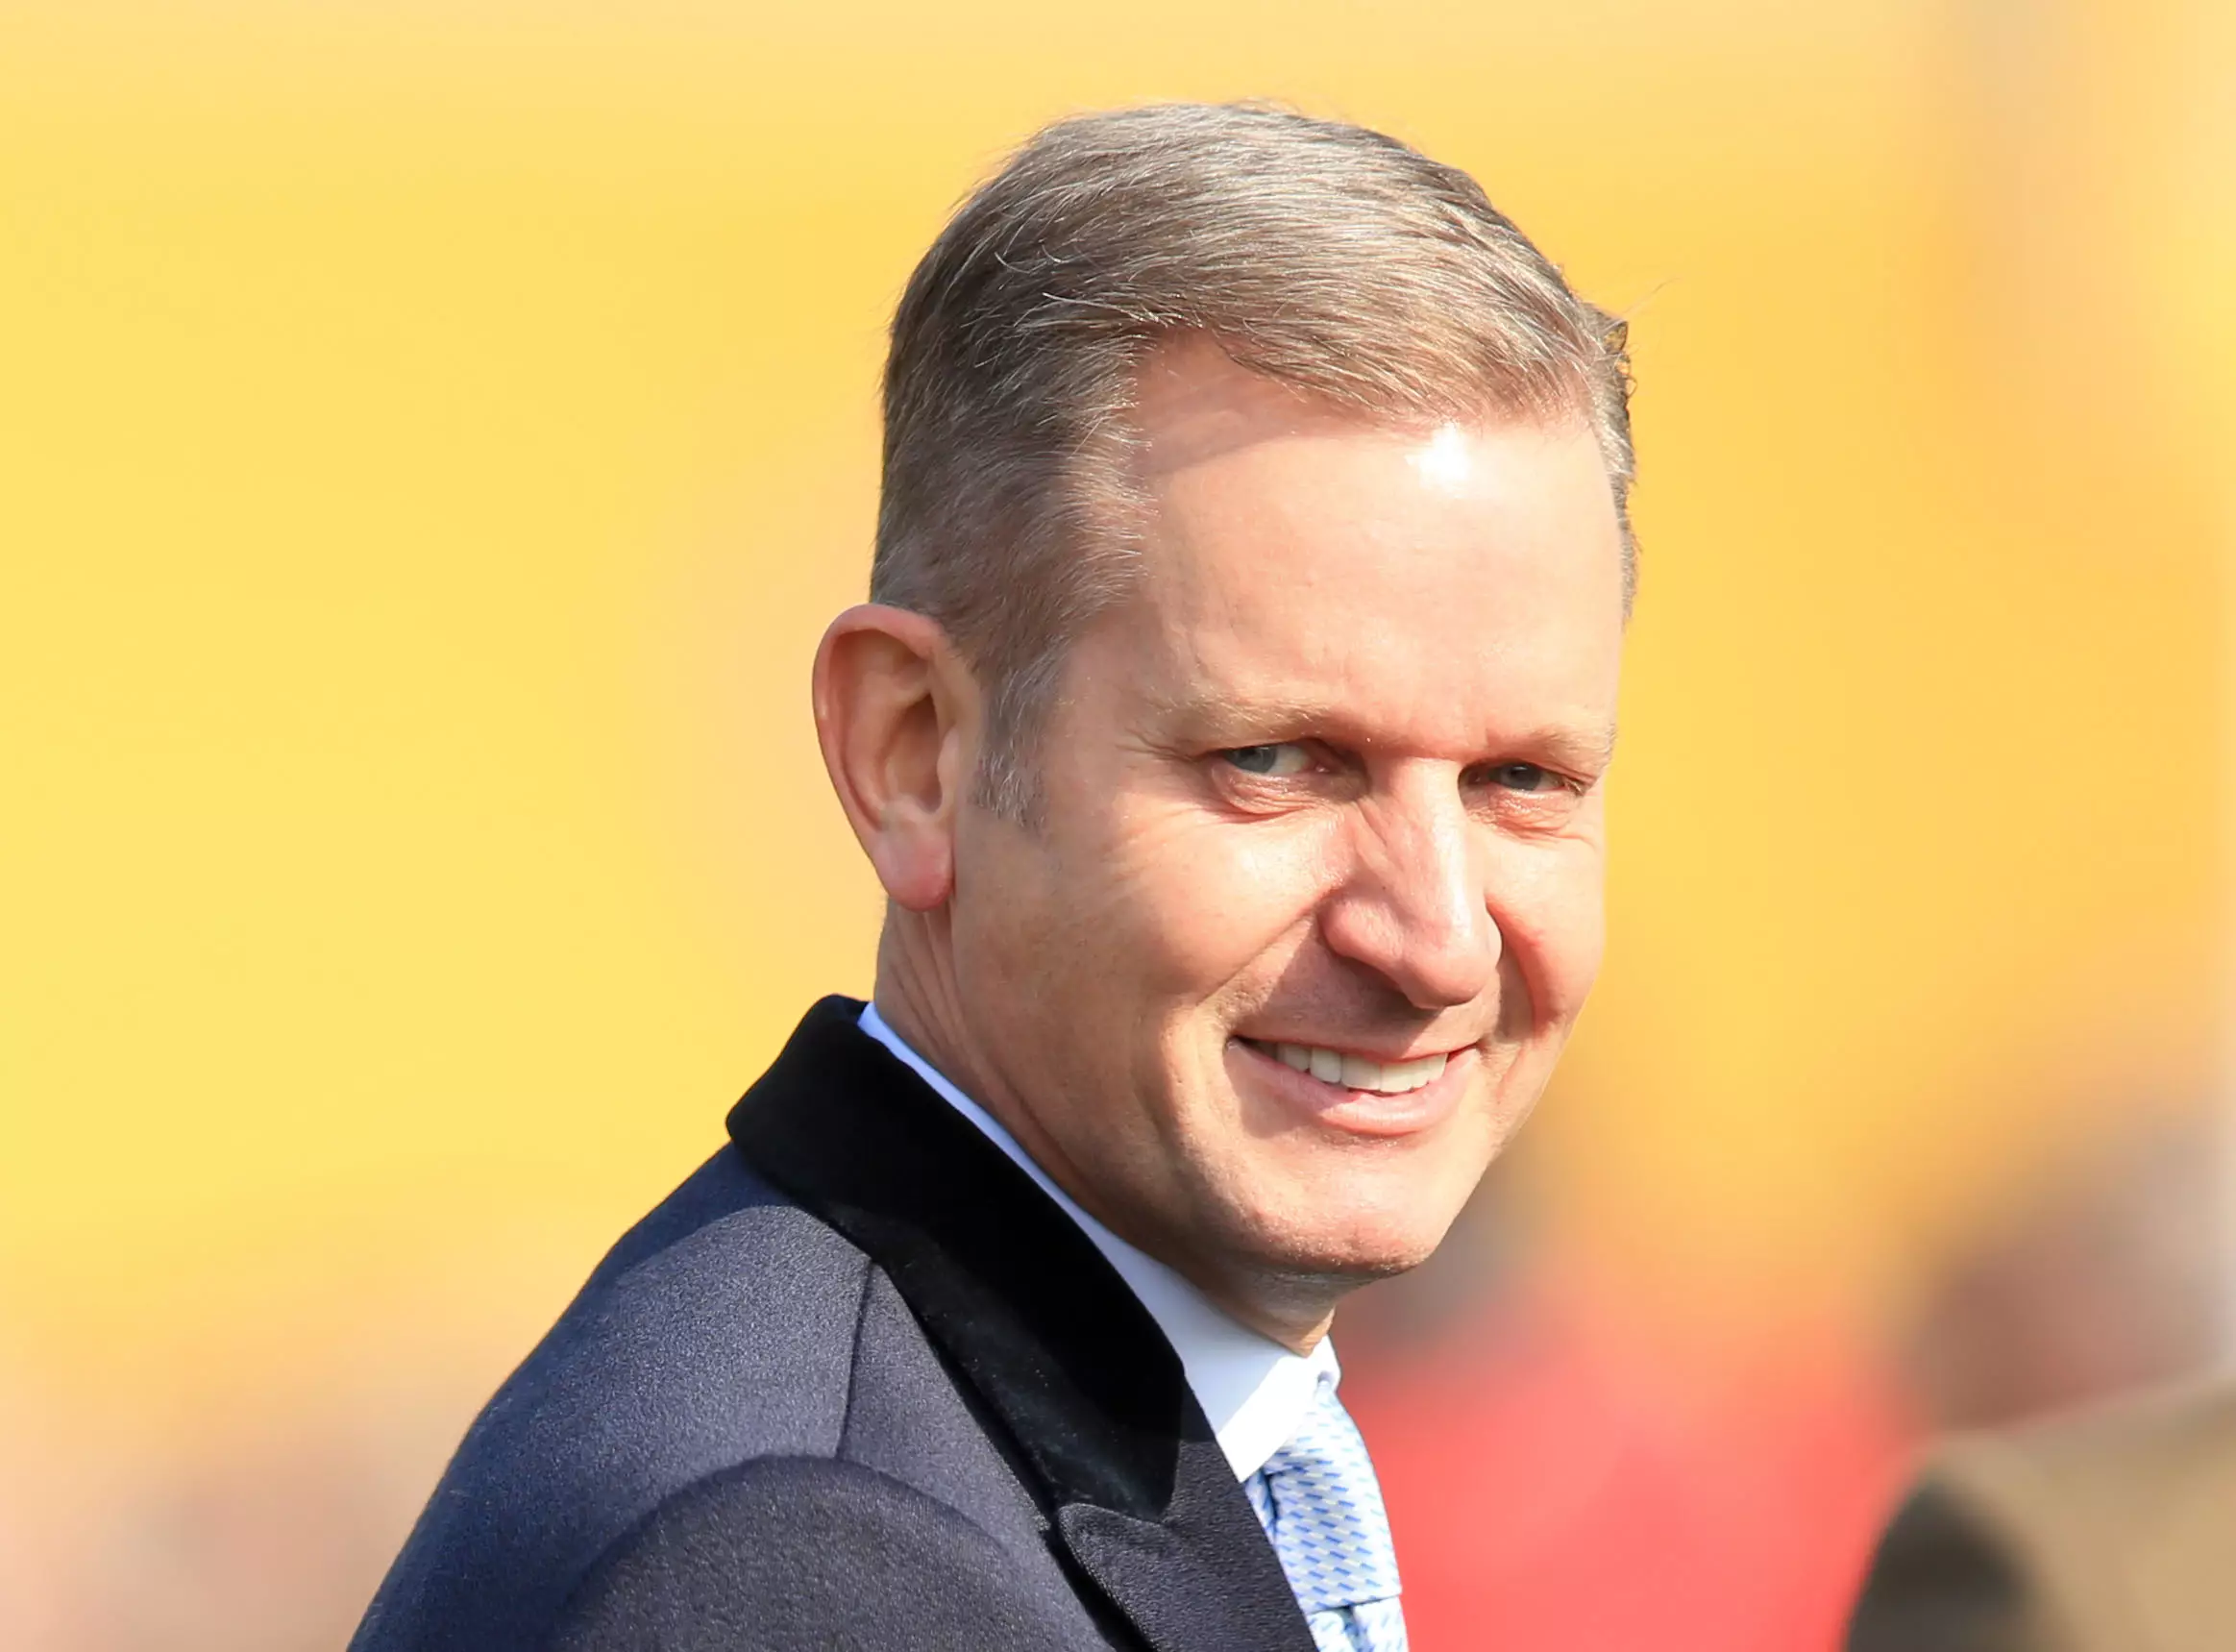 ITV Want To Work With Jeremy Kyle On Two New Shows.